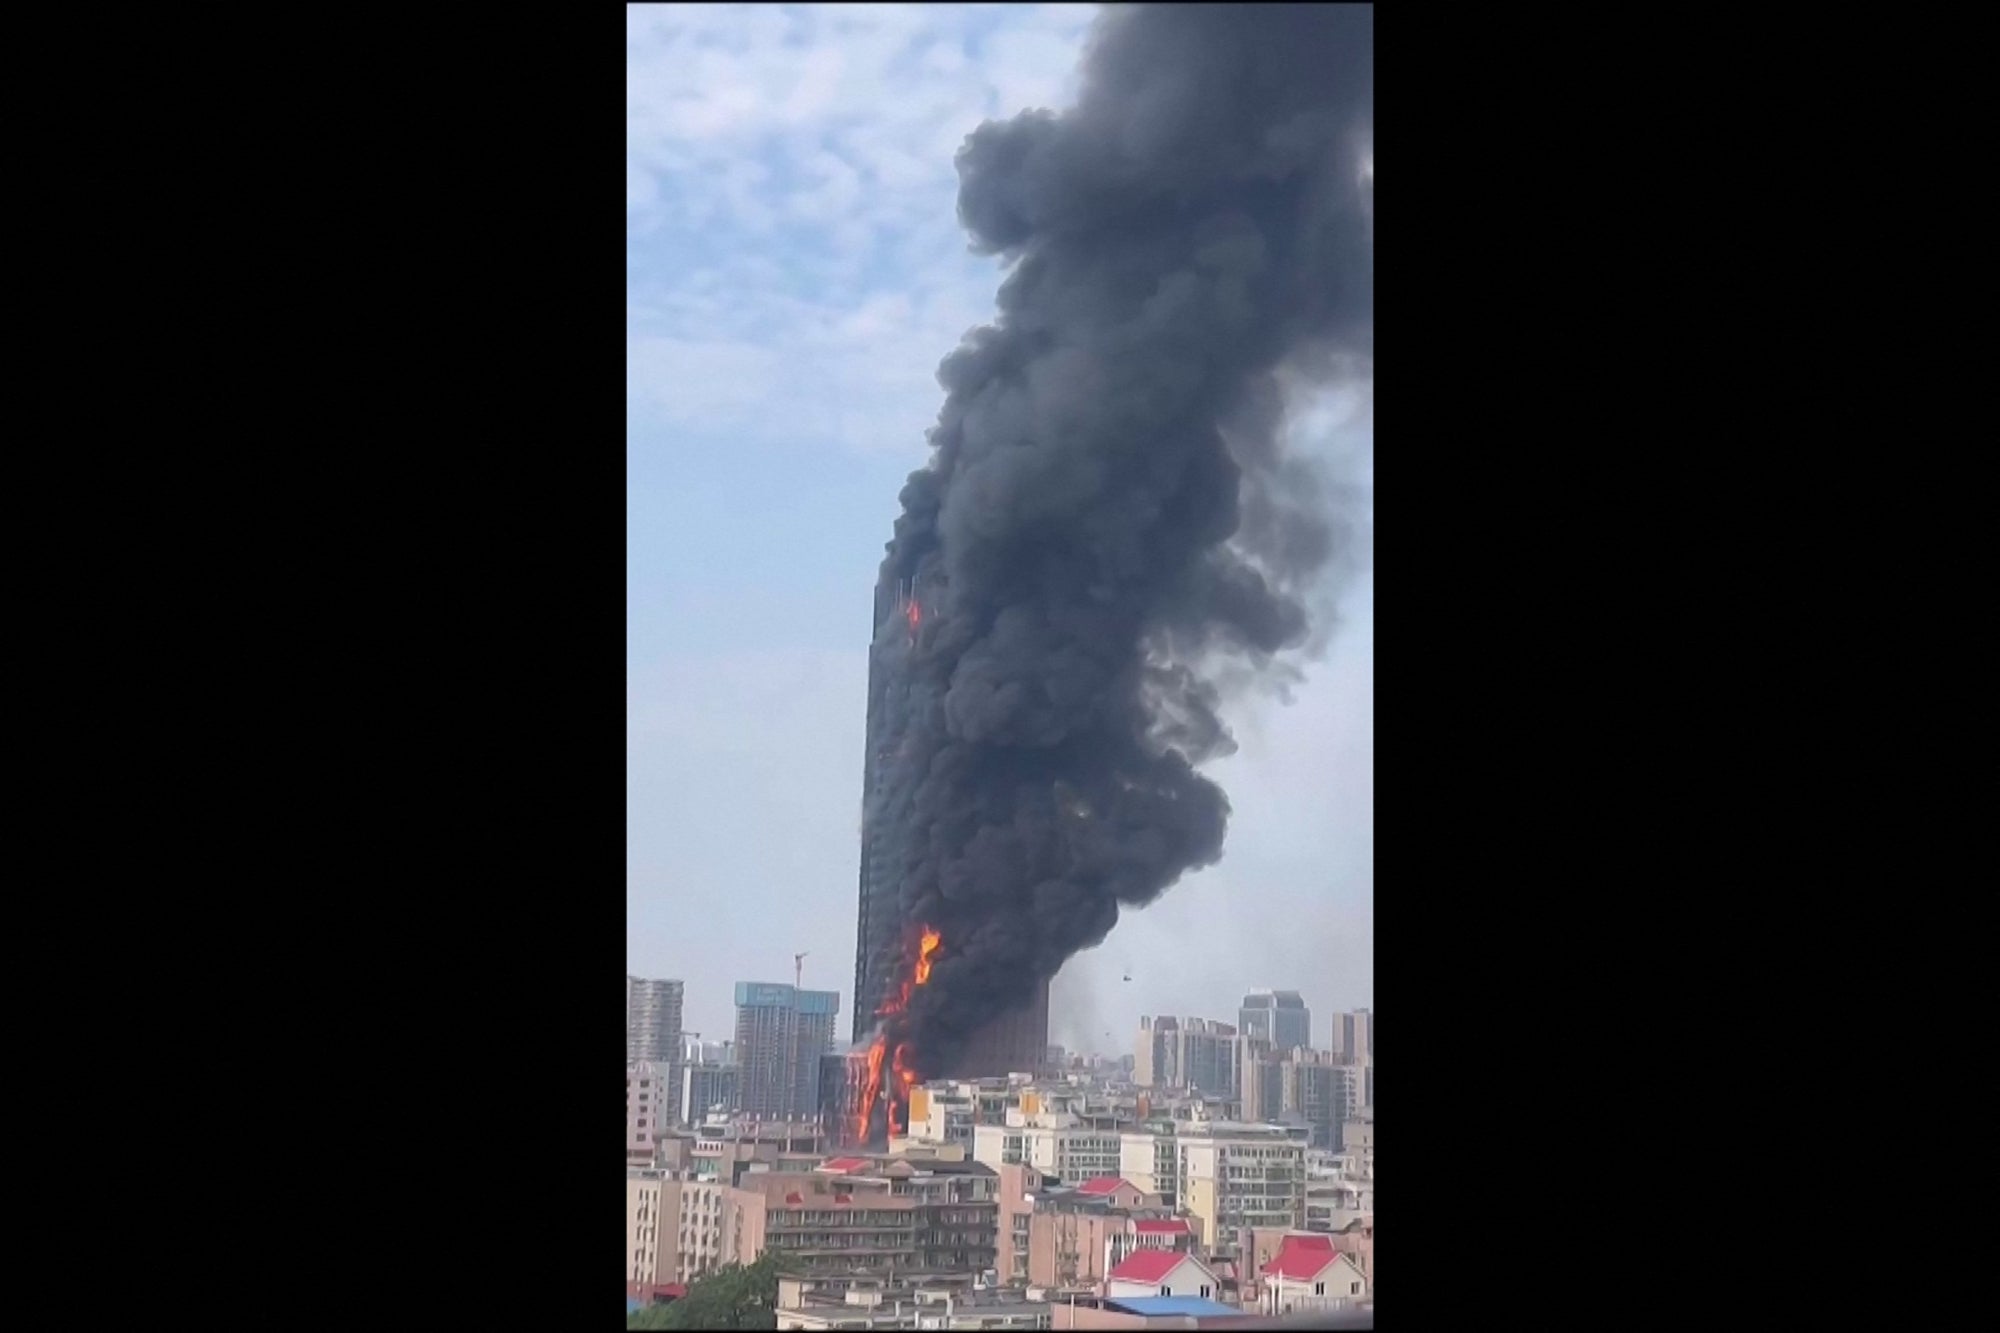 This screengrab taken from a video provided to AFPTV by an anonymous source on 16 September 2022 shows thick smoke billowing from a skyscraper in Changsha, Hunan